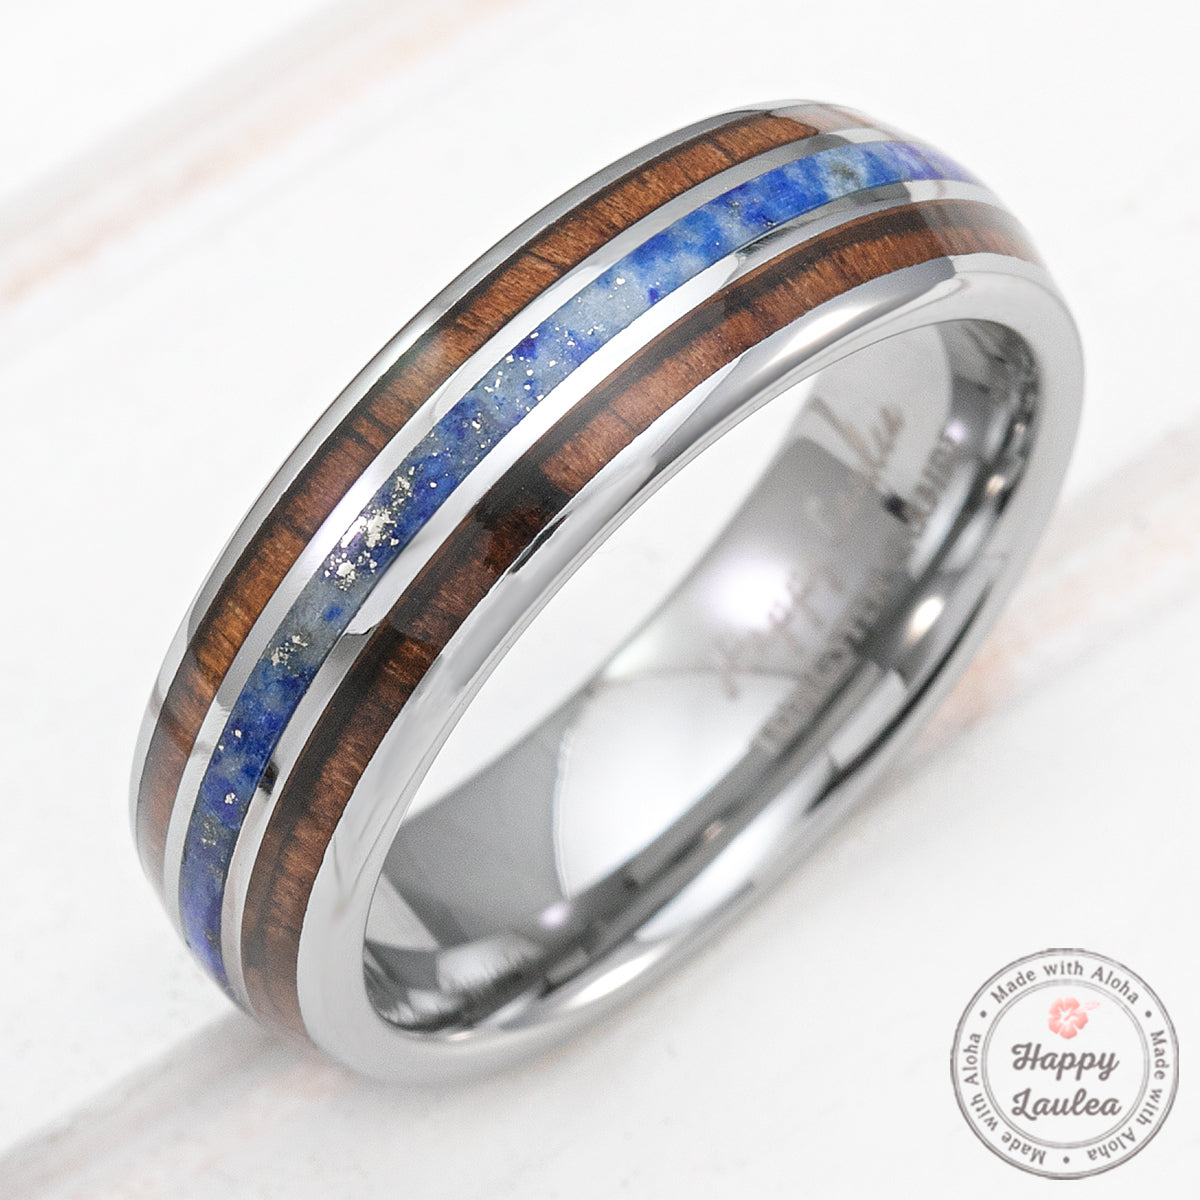 Tungsten Carbide 6mm Ring with Lapis & Koa Wood Tri-Inlay - Dome Shape, Comfort Fitment